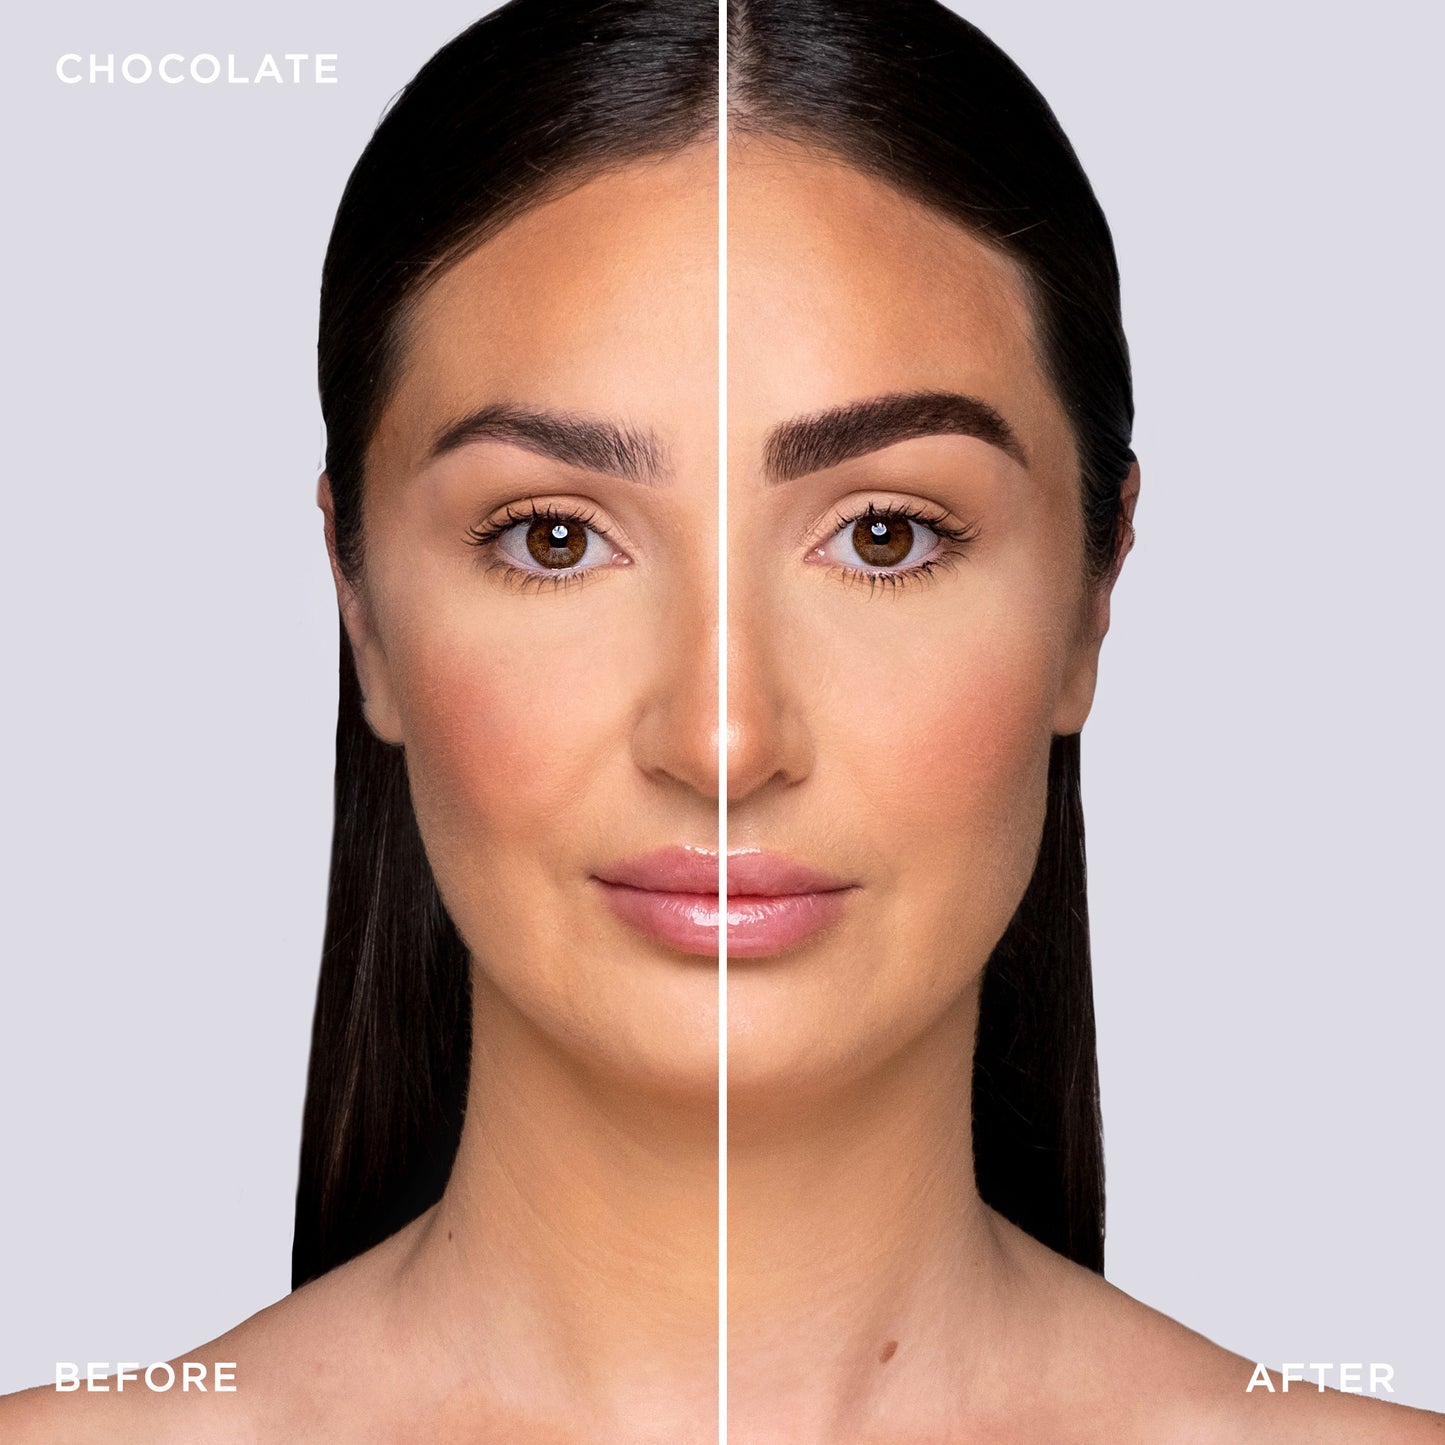 Before and after shot of model wearing Tinted Multi-Peptide Brow Gel - Color-Chocolate